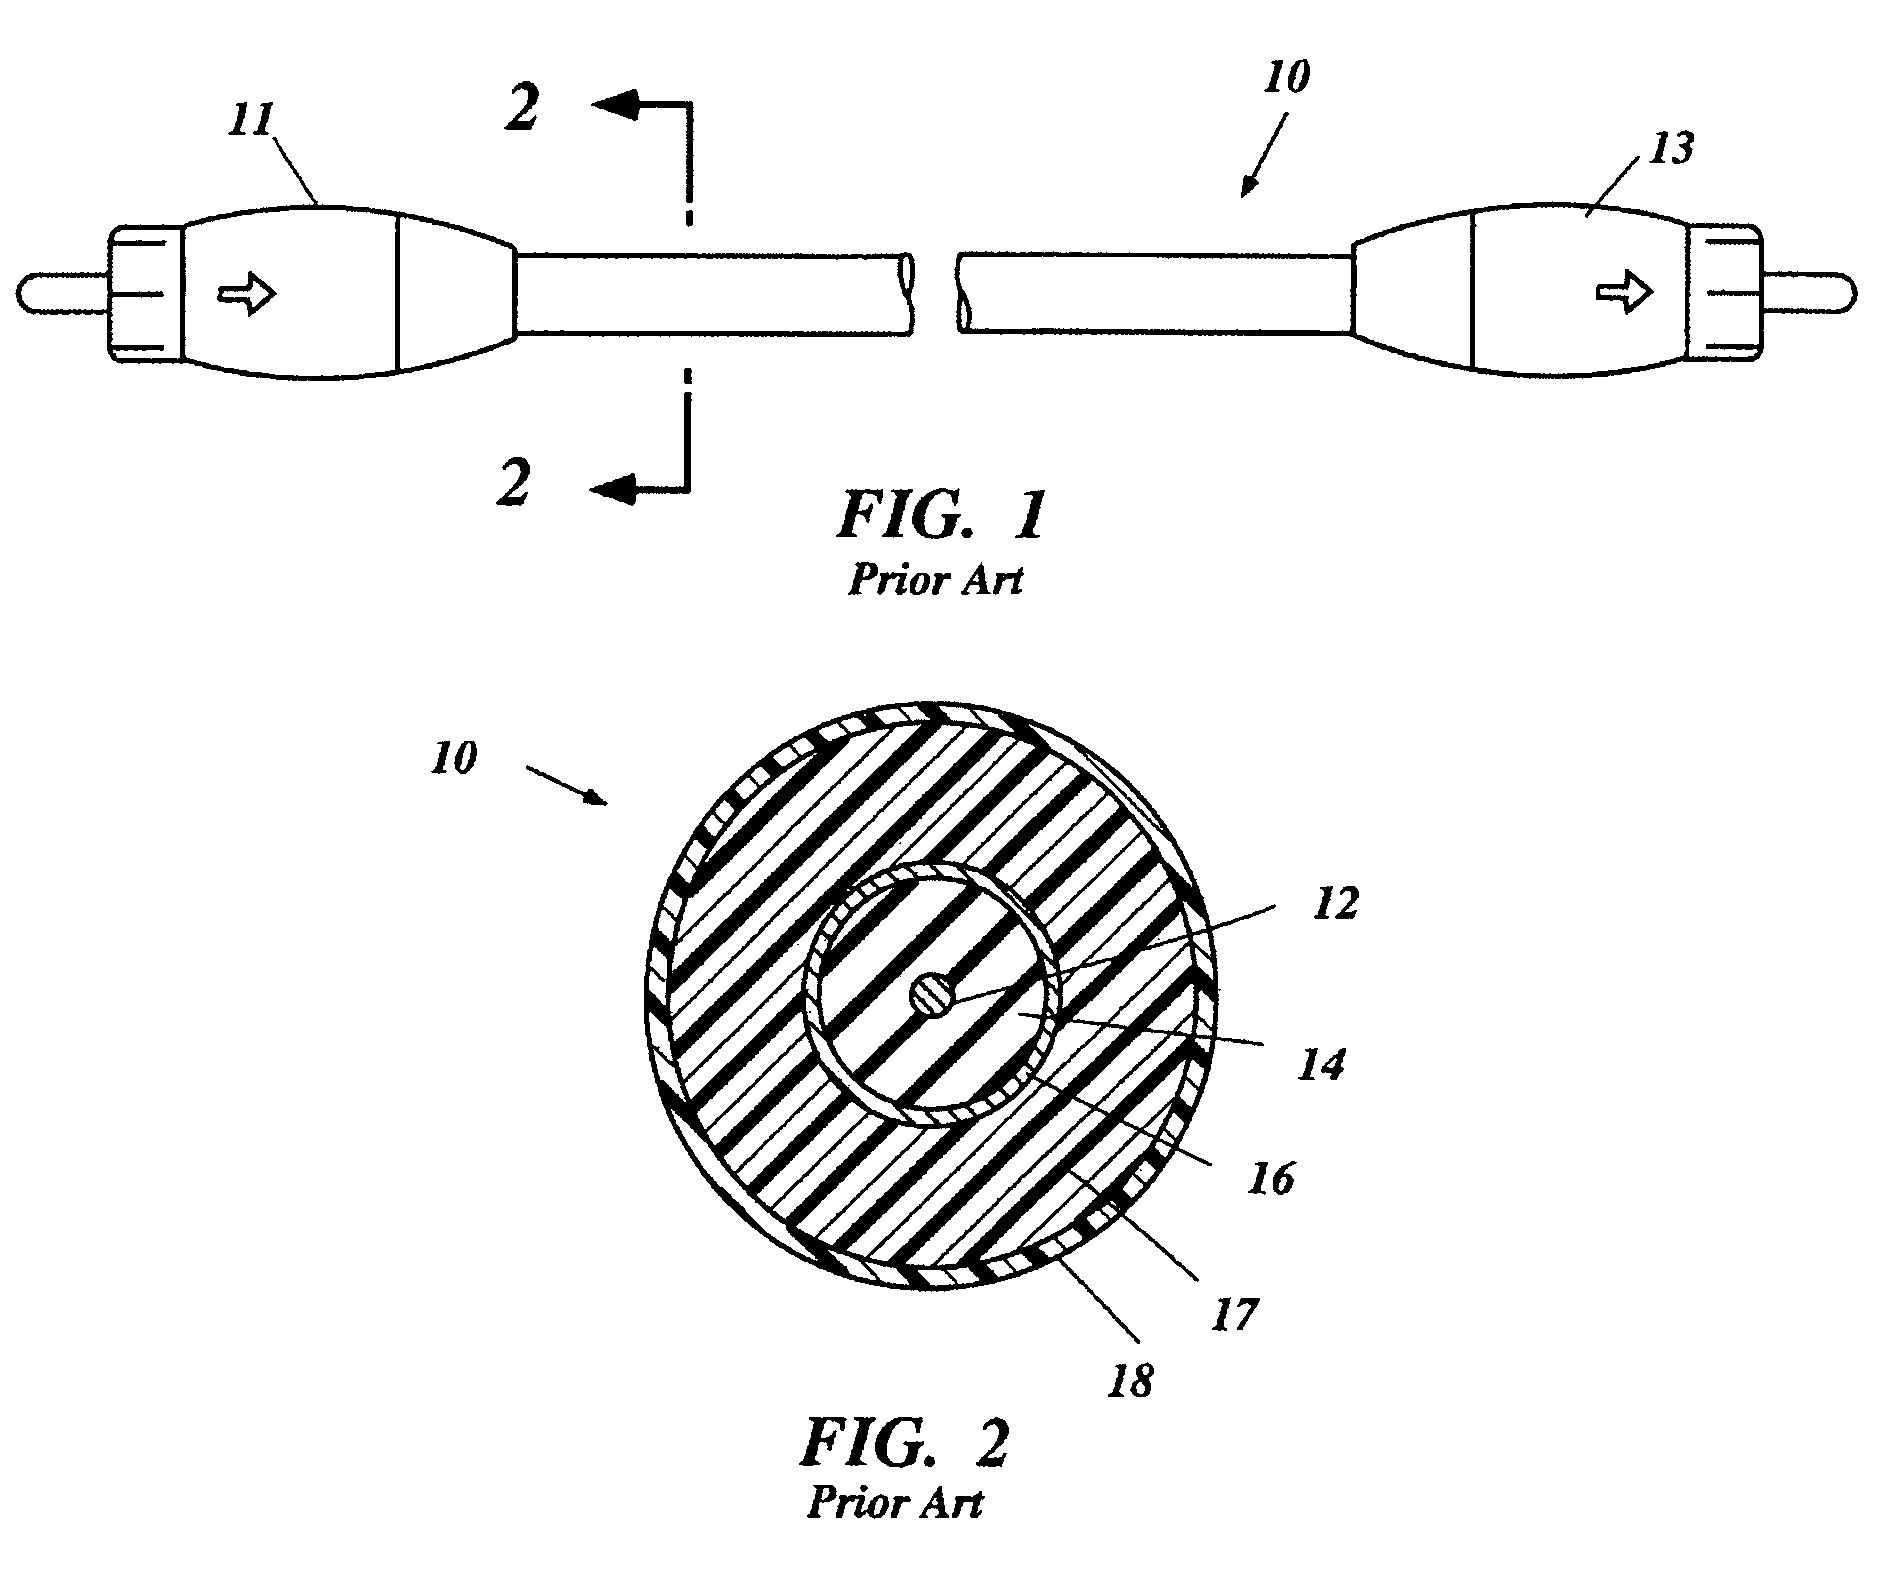 Apparatus and methods for dielectric bias system